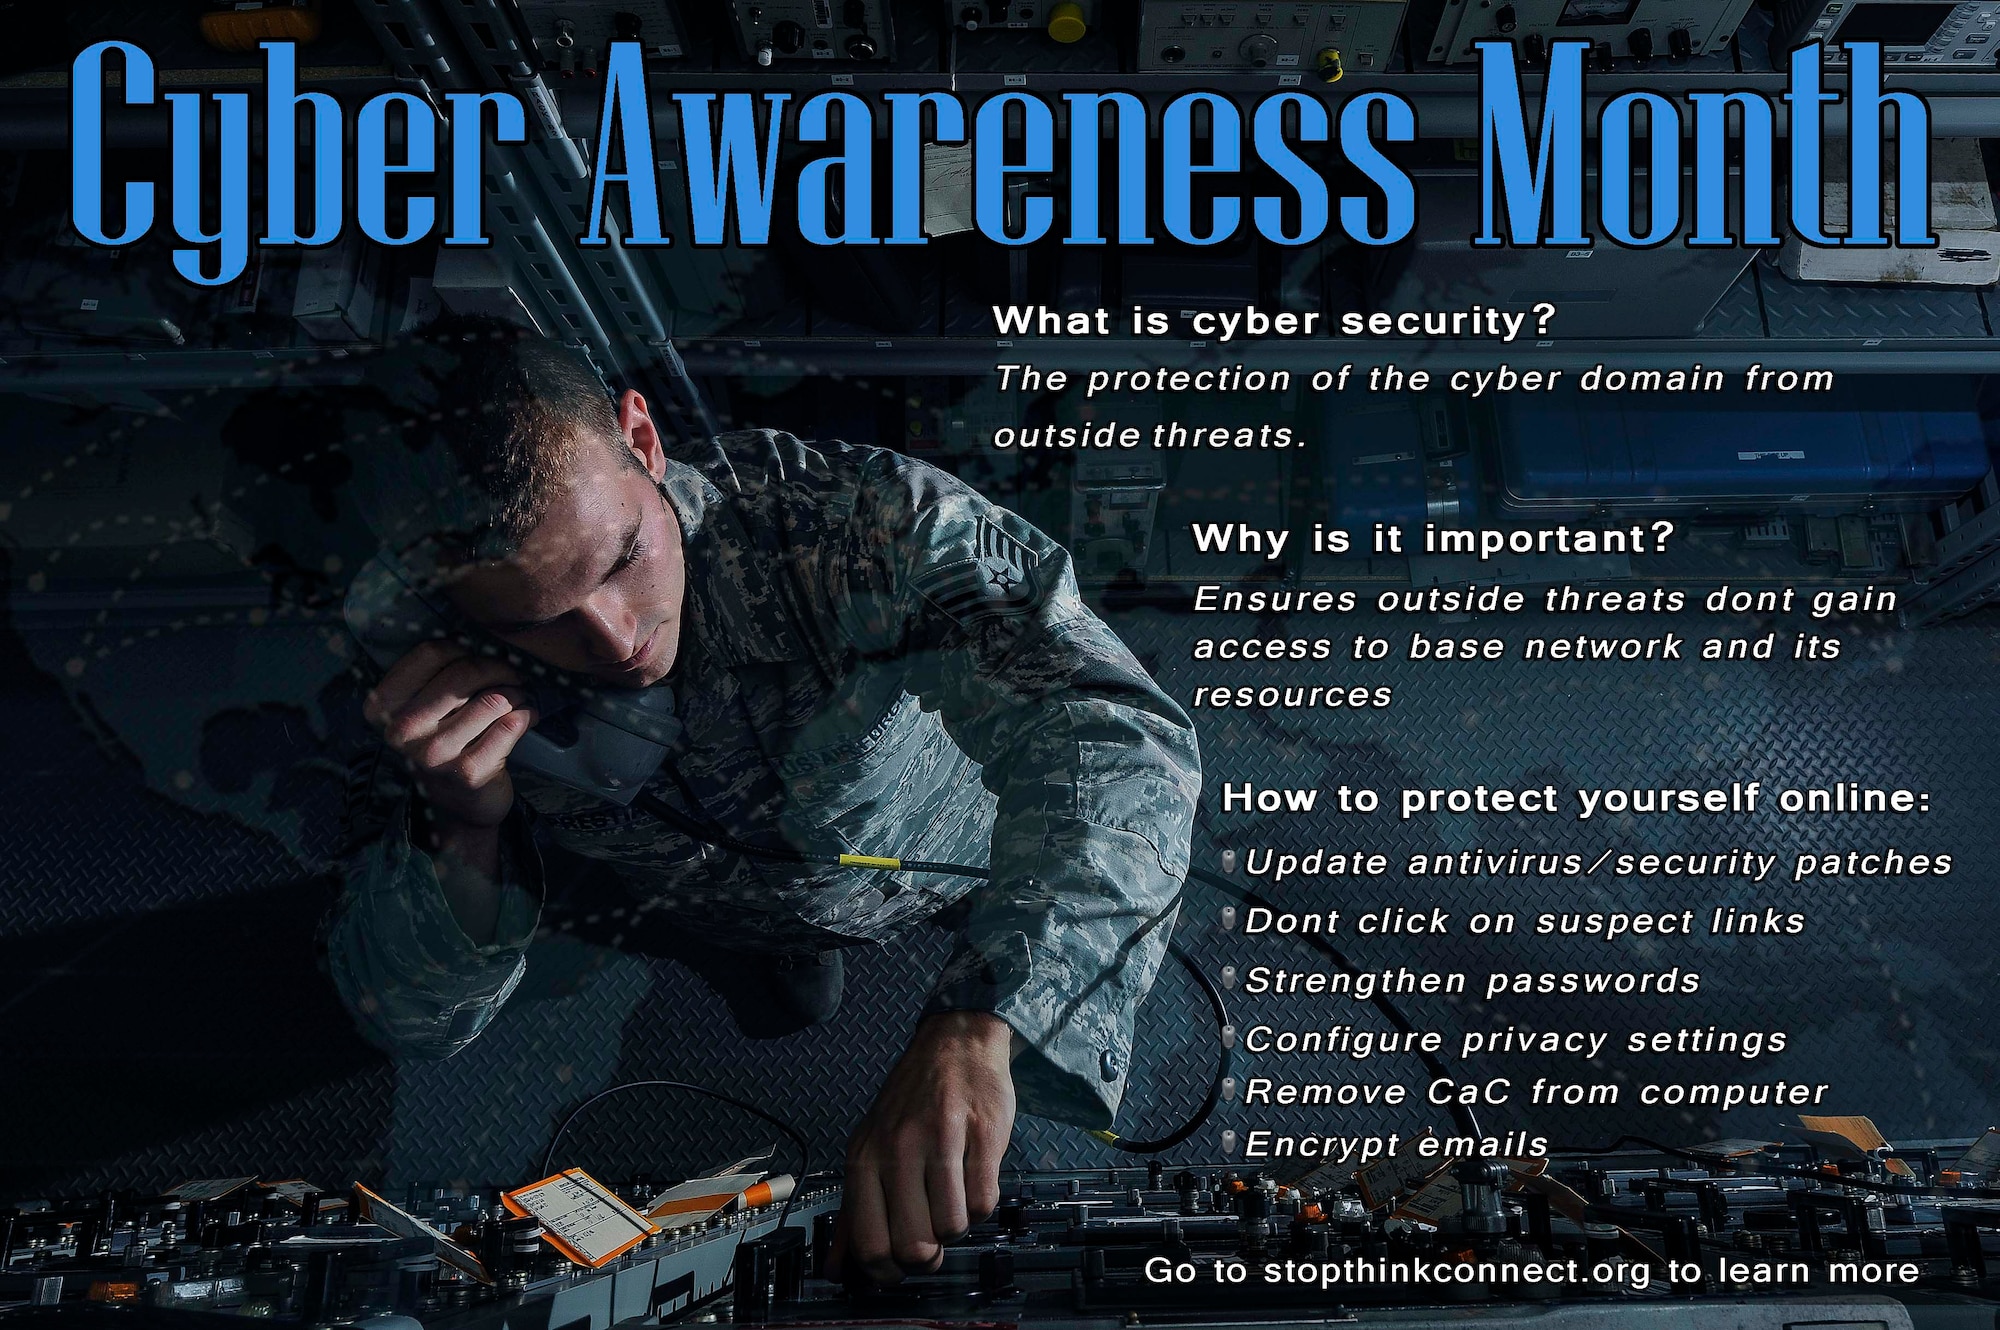 October is the month to brush up on online safety as it marks the beginning of National Cyber Security Awareness month. 